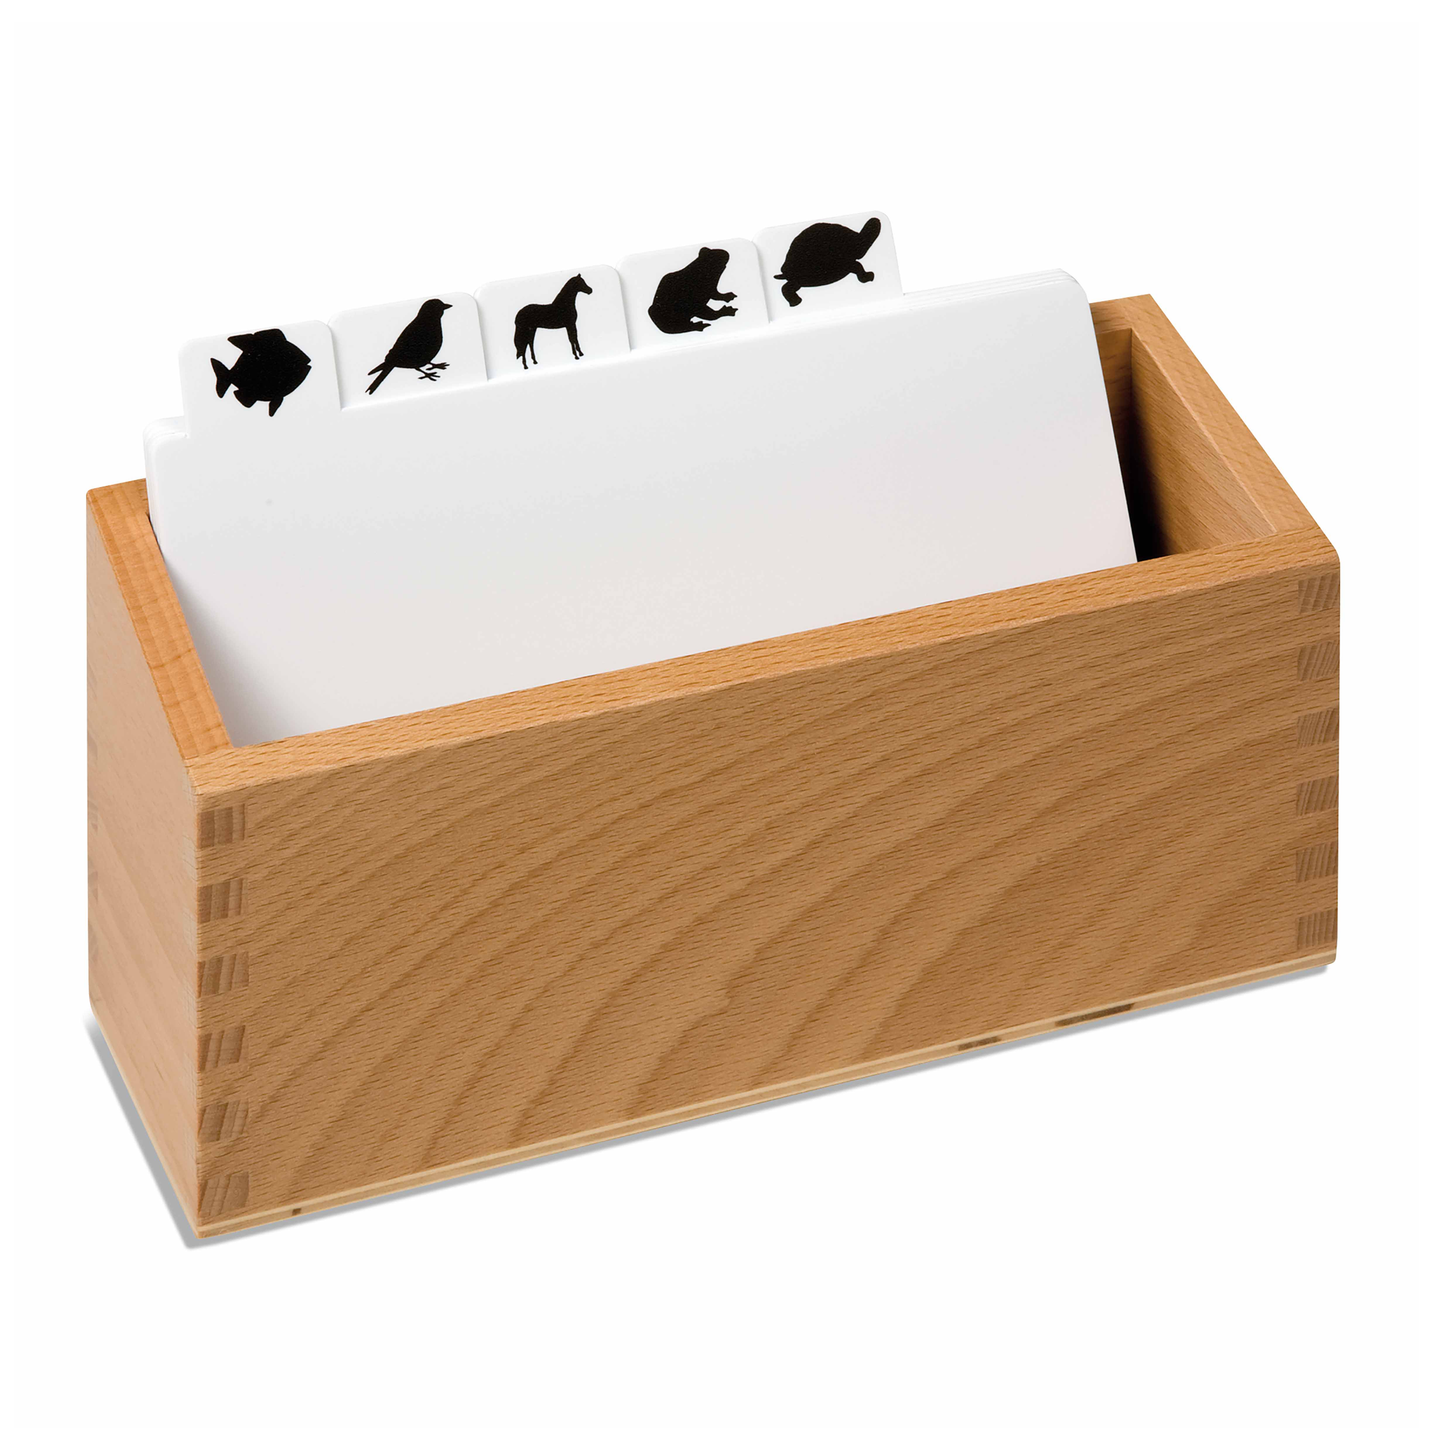 Storage box for Zoology drawing models - Nienhuis AMI